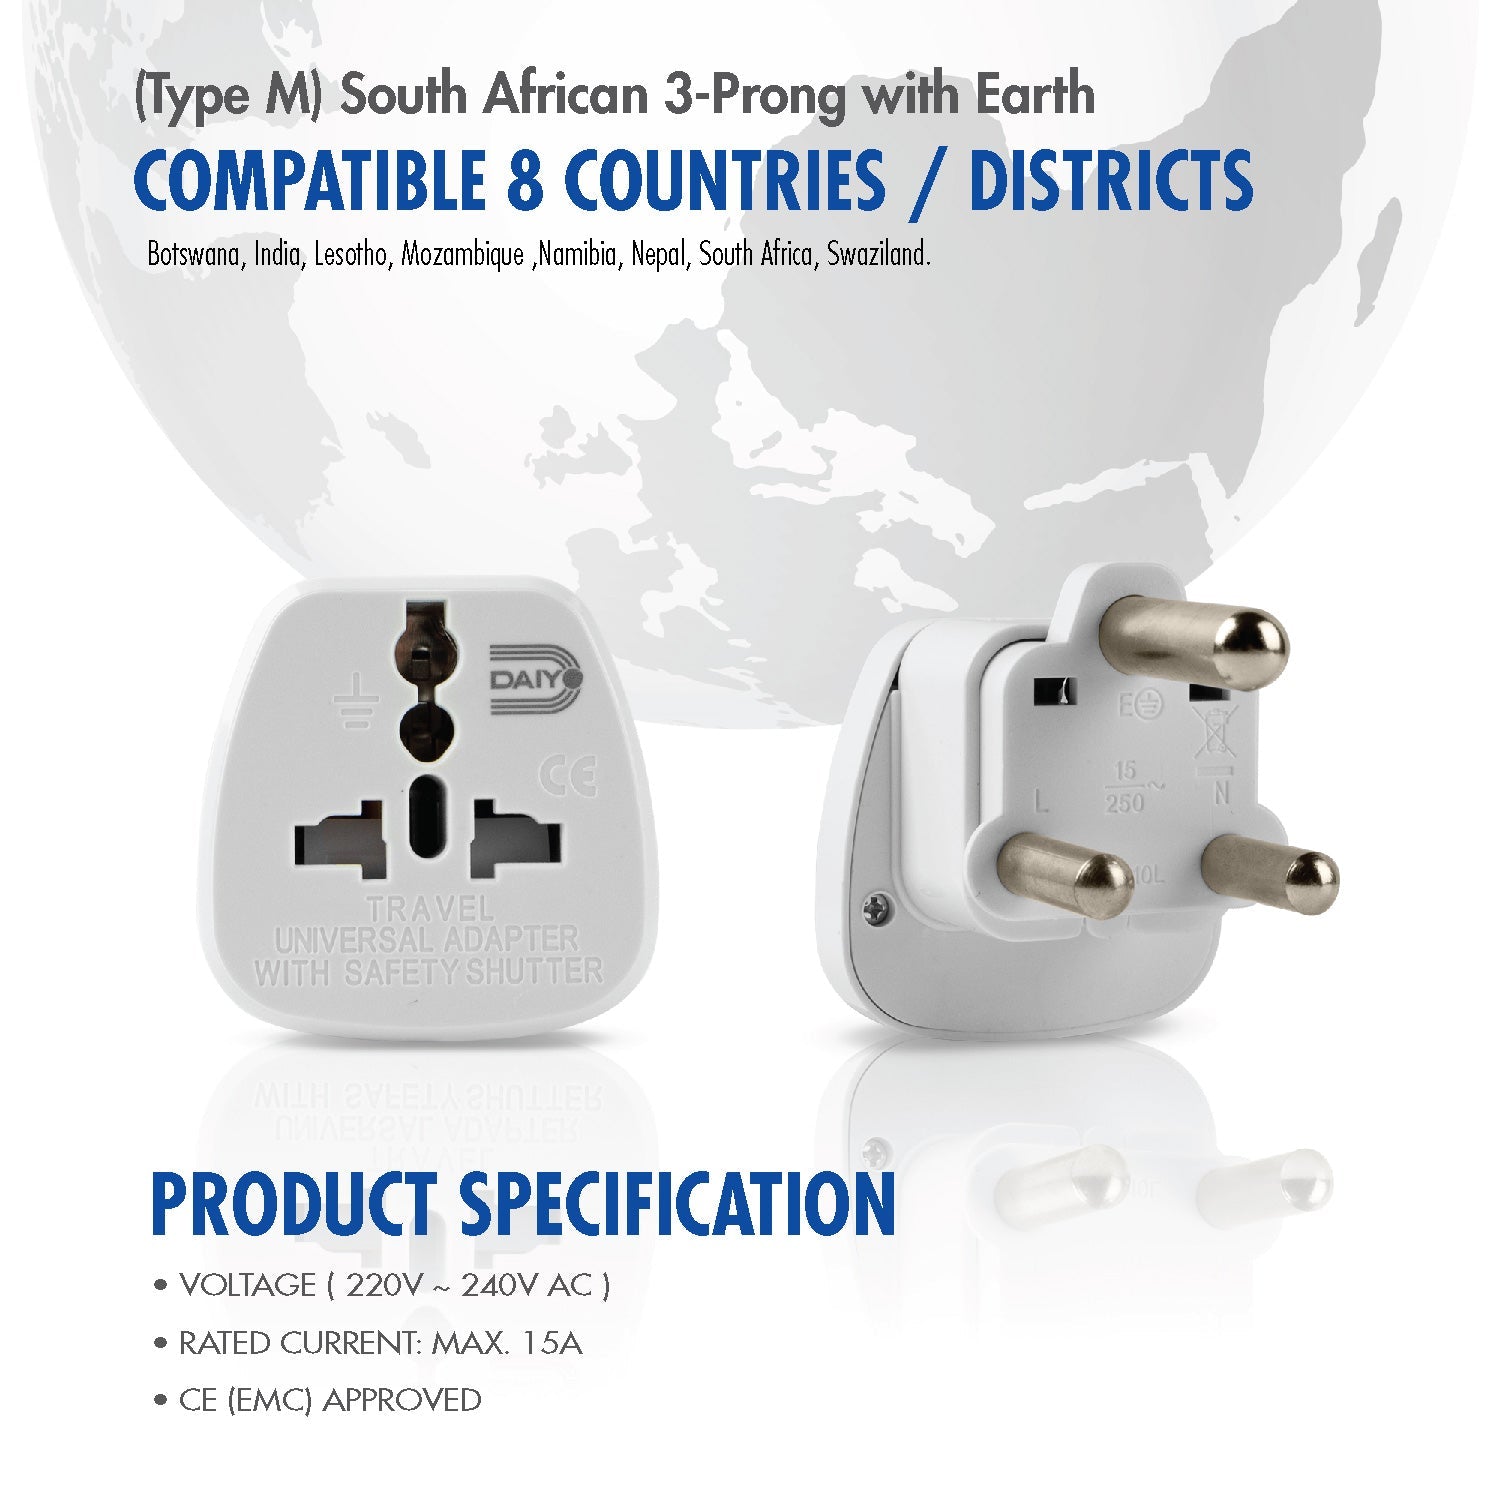 Traveller Adaptor South African 3 Prong With Earth X 2 Pieces | Botswana, India, Lesotho, Mozambique, Namibia, Nepal